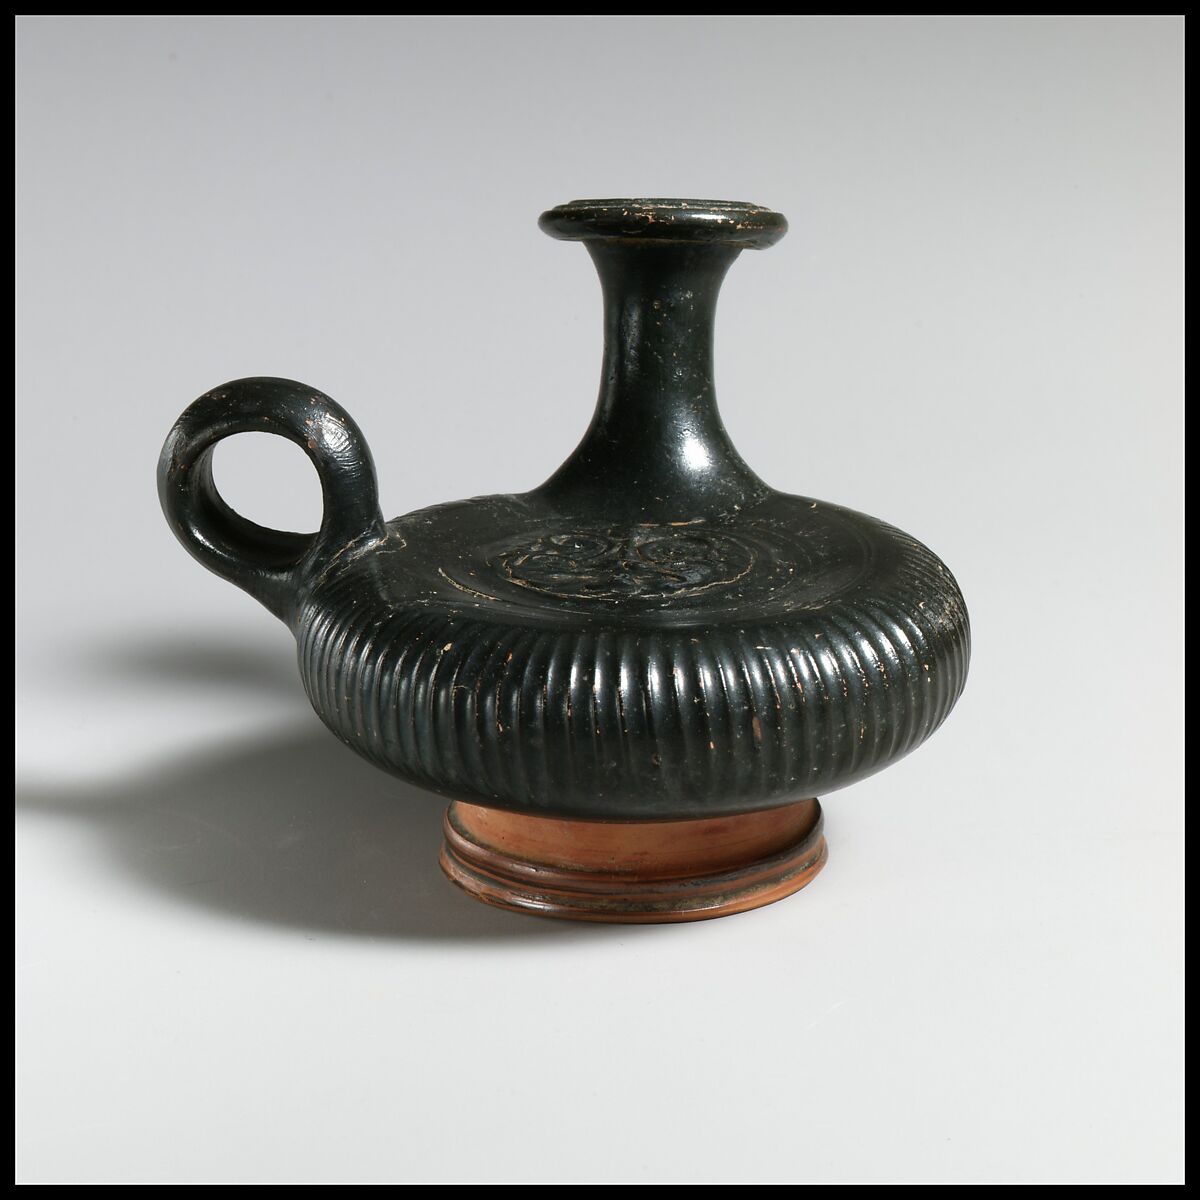 Terracotta guttus (flask with handle and vertical spout), Terracotta, Greek, South Italian, Apulian 